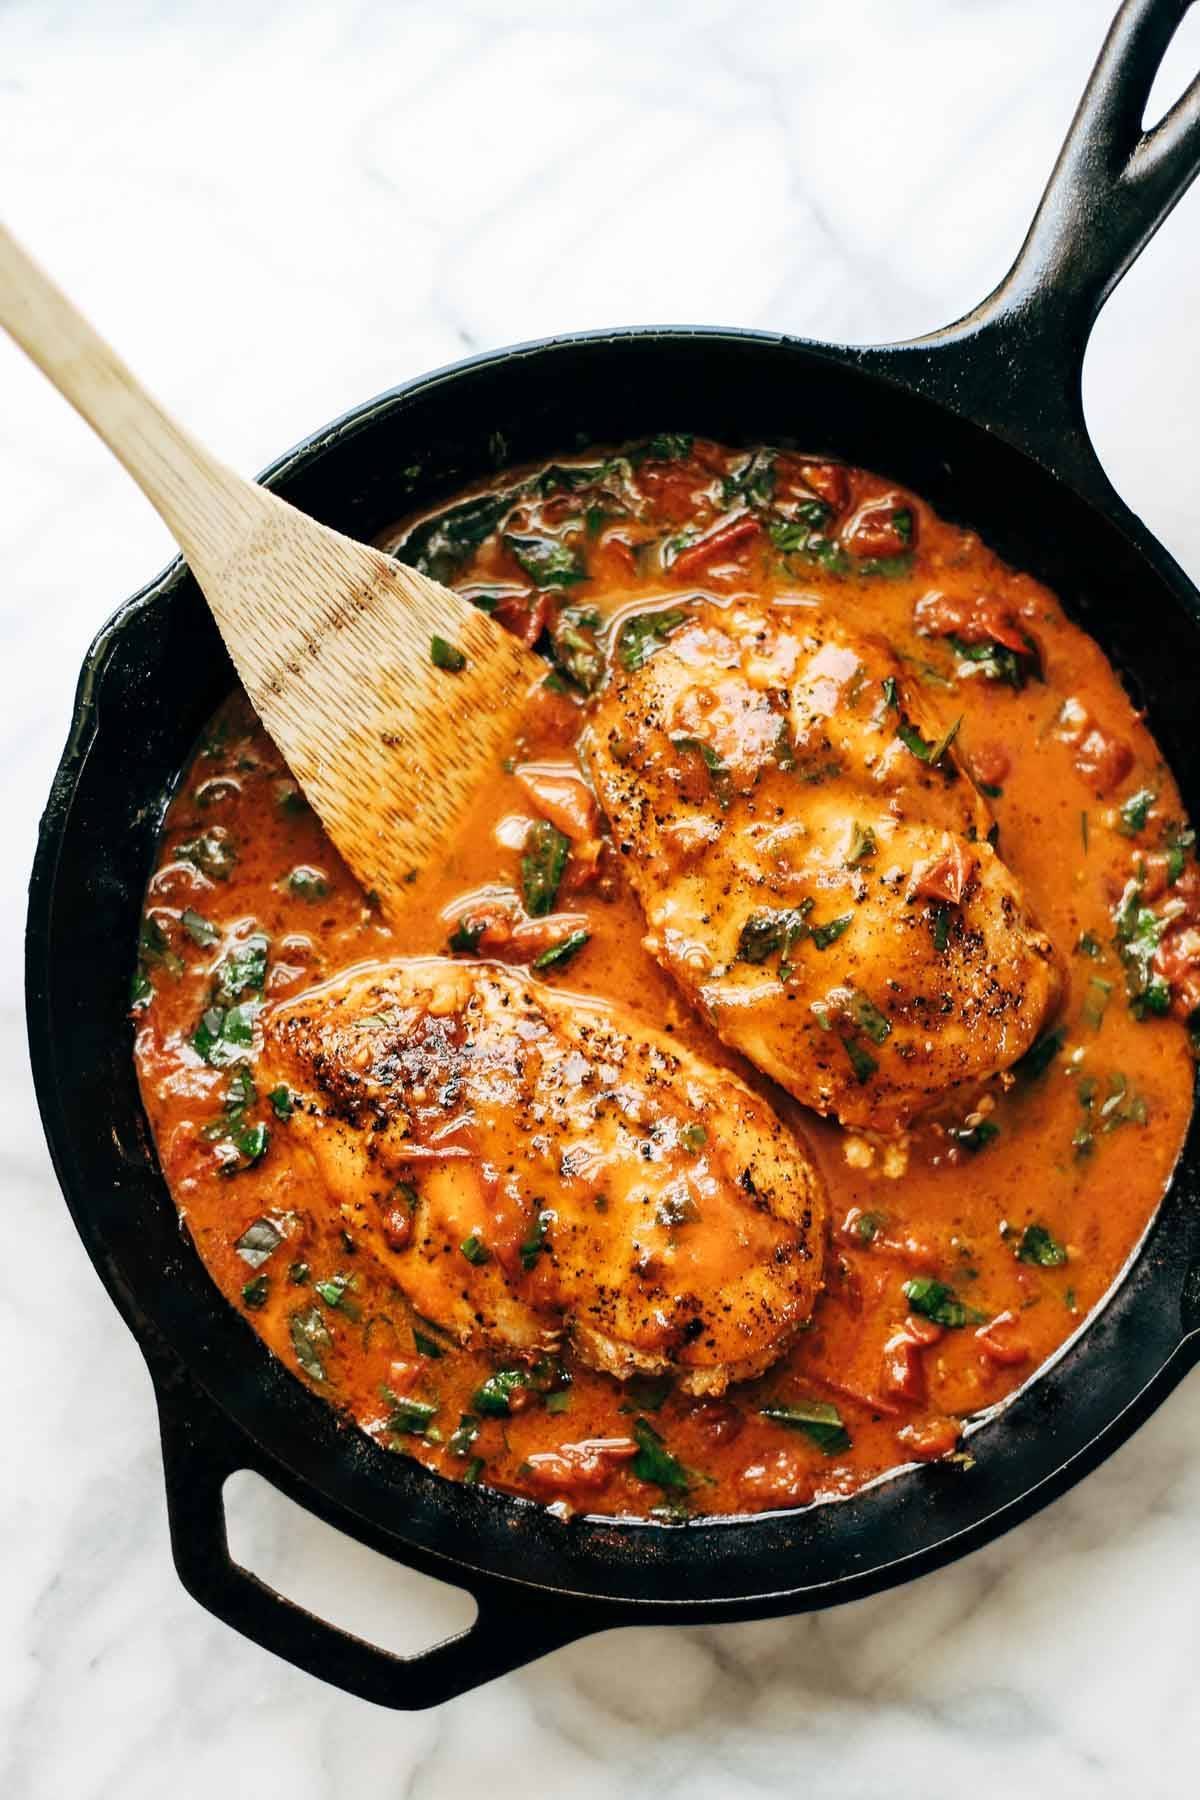 Garlic Basil Chicken - you won't believe that this easy real food recipe only requires 7 ingredients like basil, garlic, olive oil, tomatoes, and butter. | pinchofyum.com